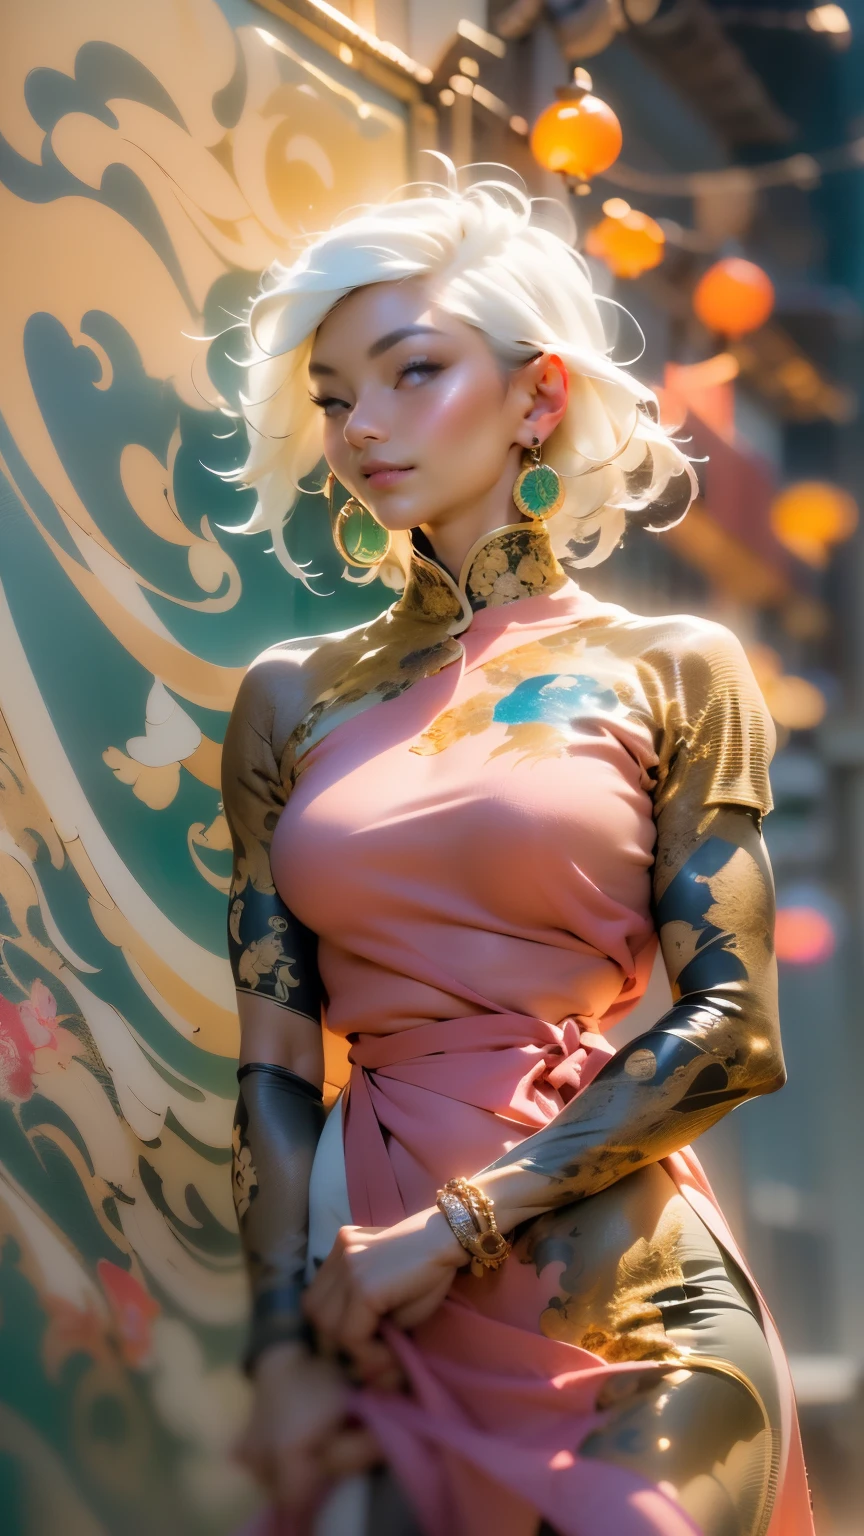 (Realistic Painting), (Best Quality, High Resolution, Photo Realistic: 1.37), (Vivid Colors), (Studio Lighting), (Orange, Pink, White, and Green Details), (Woman with White Hair), (Tattoos), (Technological clothing: 1.1), (Abstract background with lines and circles). ((best quality, high resolution, clear image, detailed background, girl, flower-t tattoo, starry sky)). ((Best quality: 1.37), (1 girl - solo, full-length, waist-high, loose - relaxed pose, standing), (fashionable pink dress, technological image)). ((Settings, soft light, shadows). (tech background - abstraction) HD detail, cinematic, surrealism, Soft light, Deep focus, ray tracing, Diffusion.